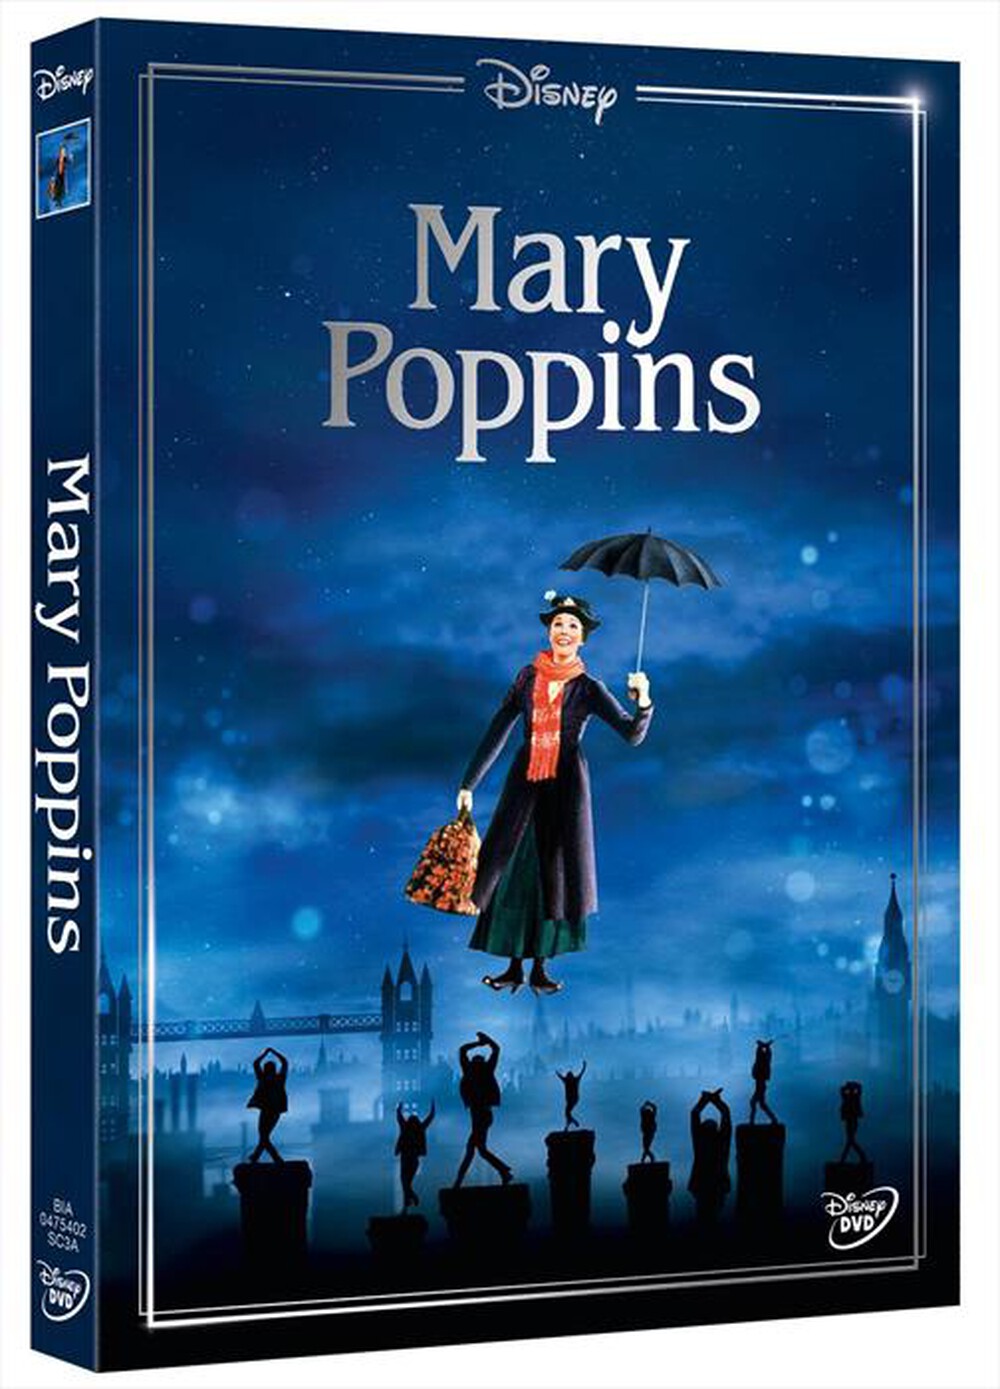 "EAGLE PICTURES - Mary Poppins (New Edition)"